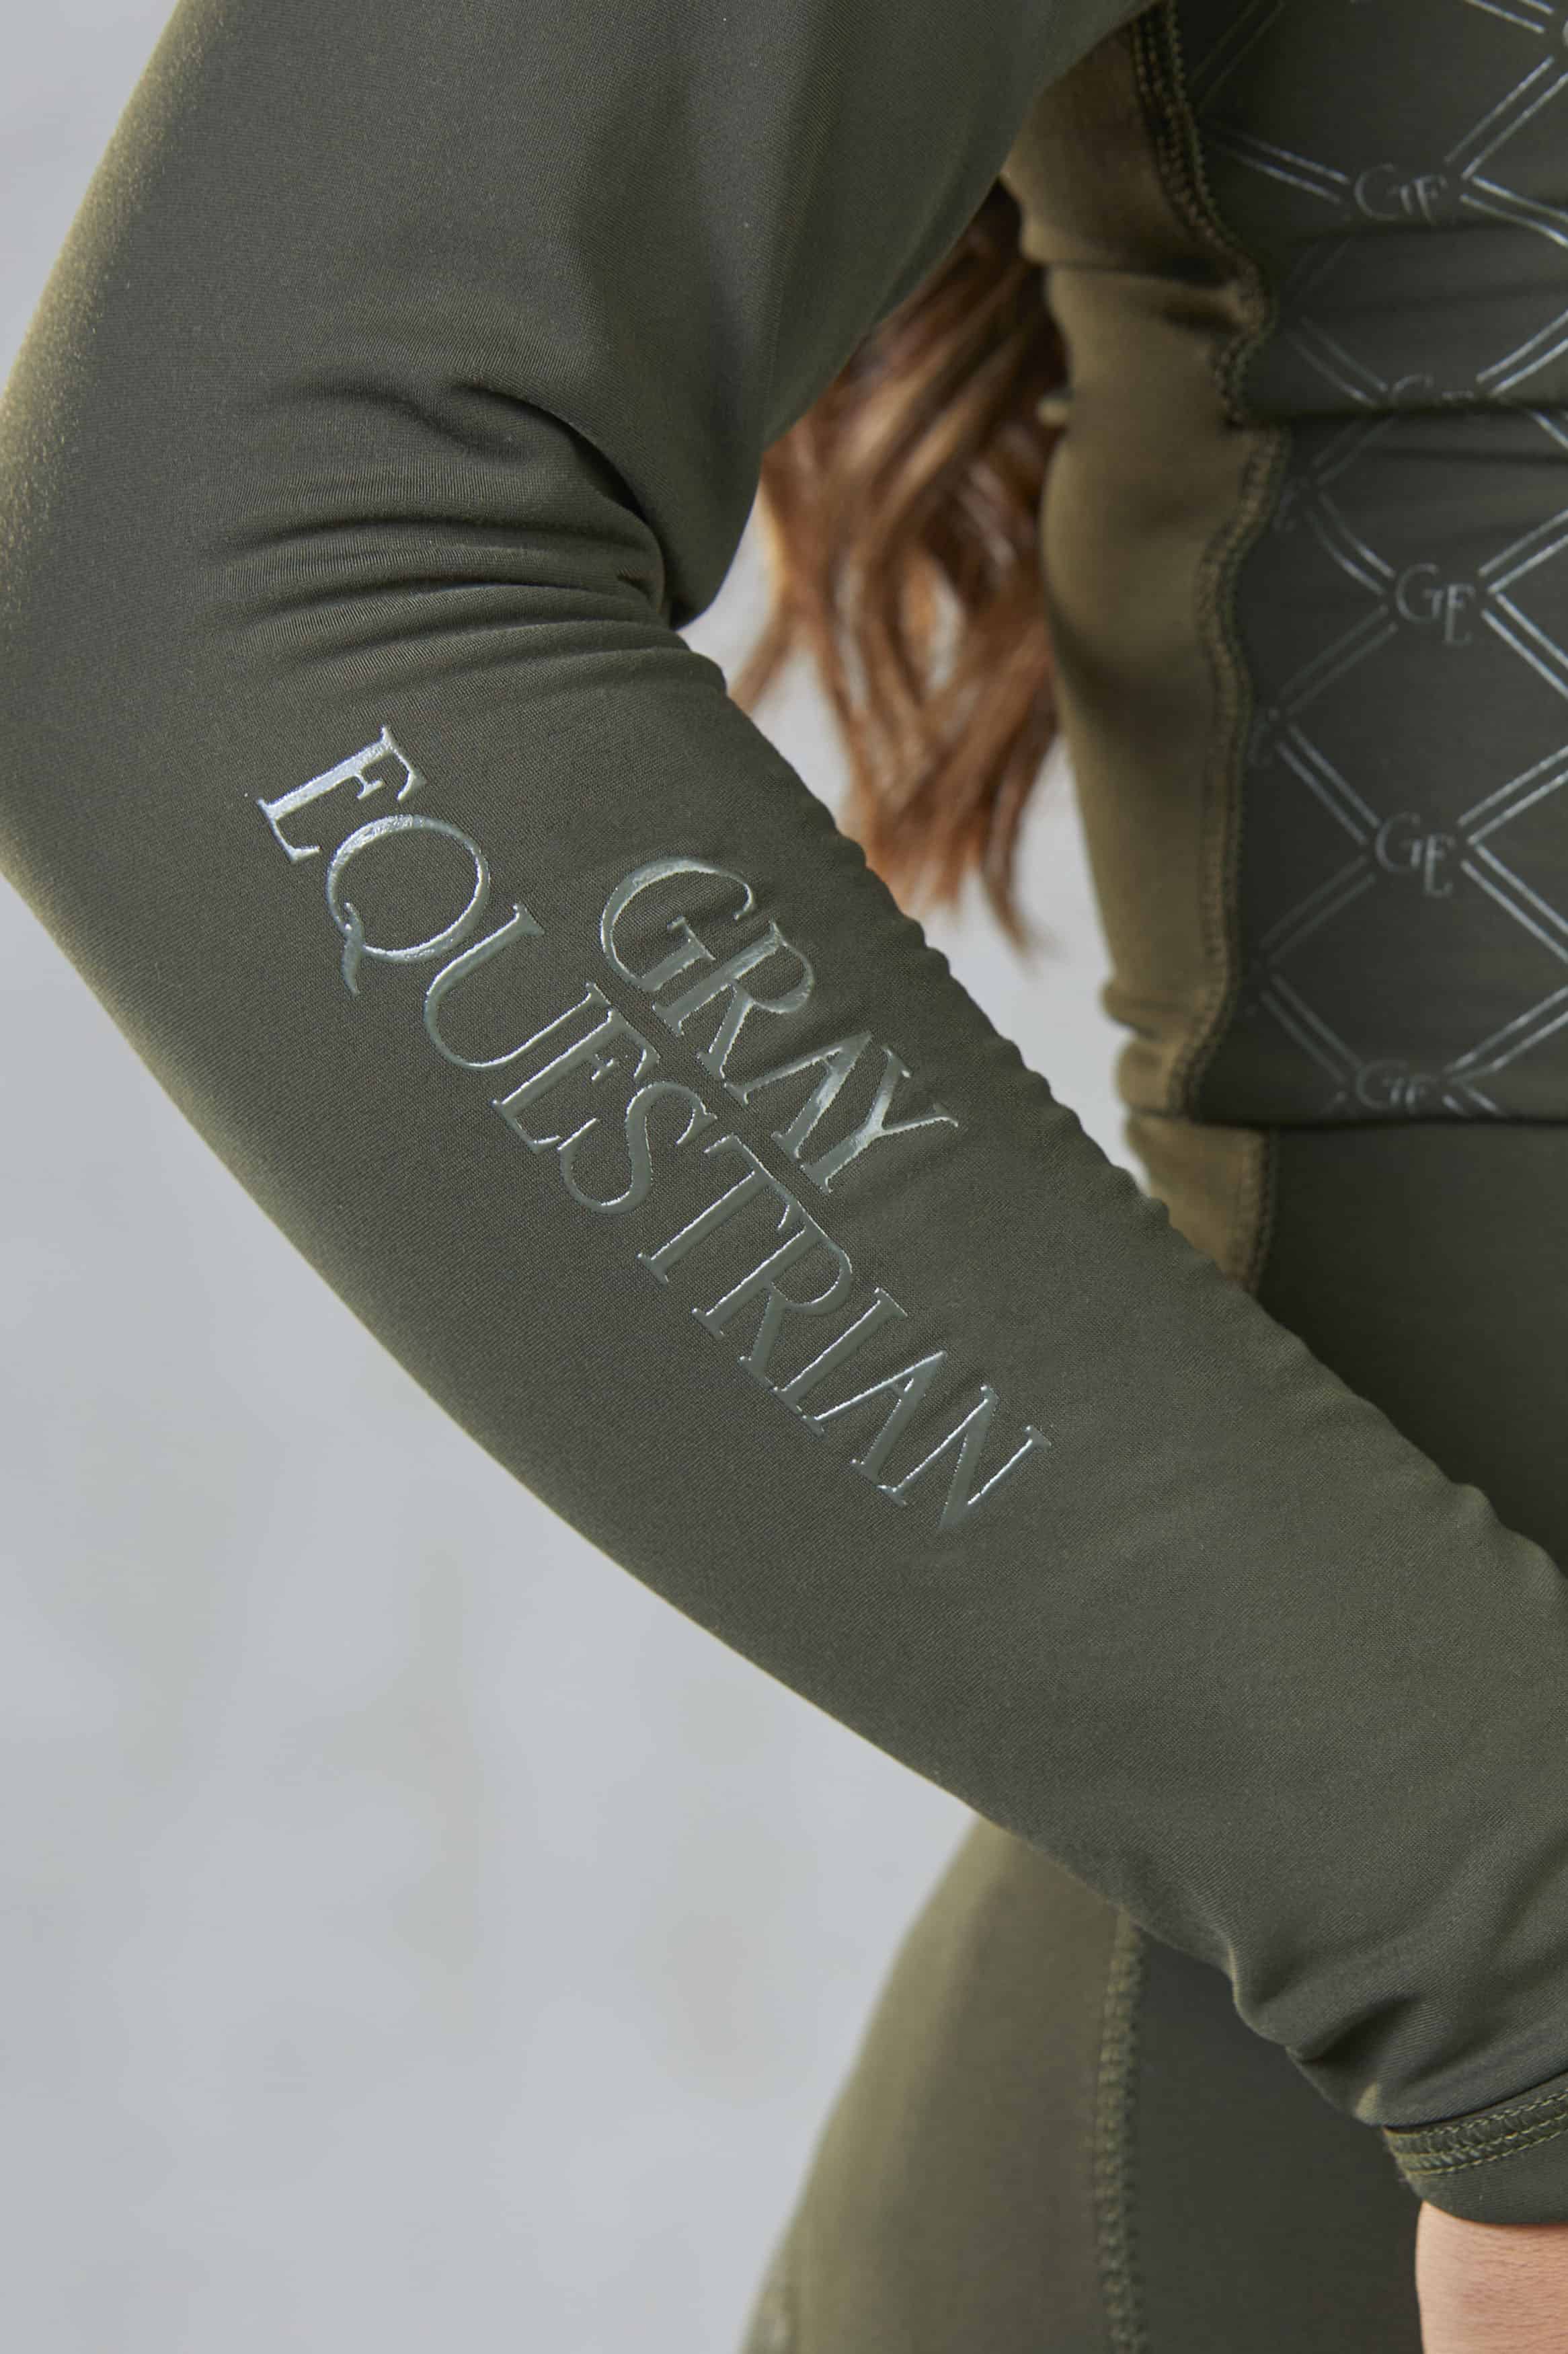 A close up of the subtle Gray Equestrian branding on the sleeve of our base layer.